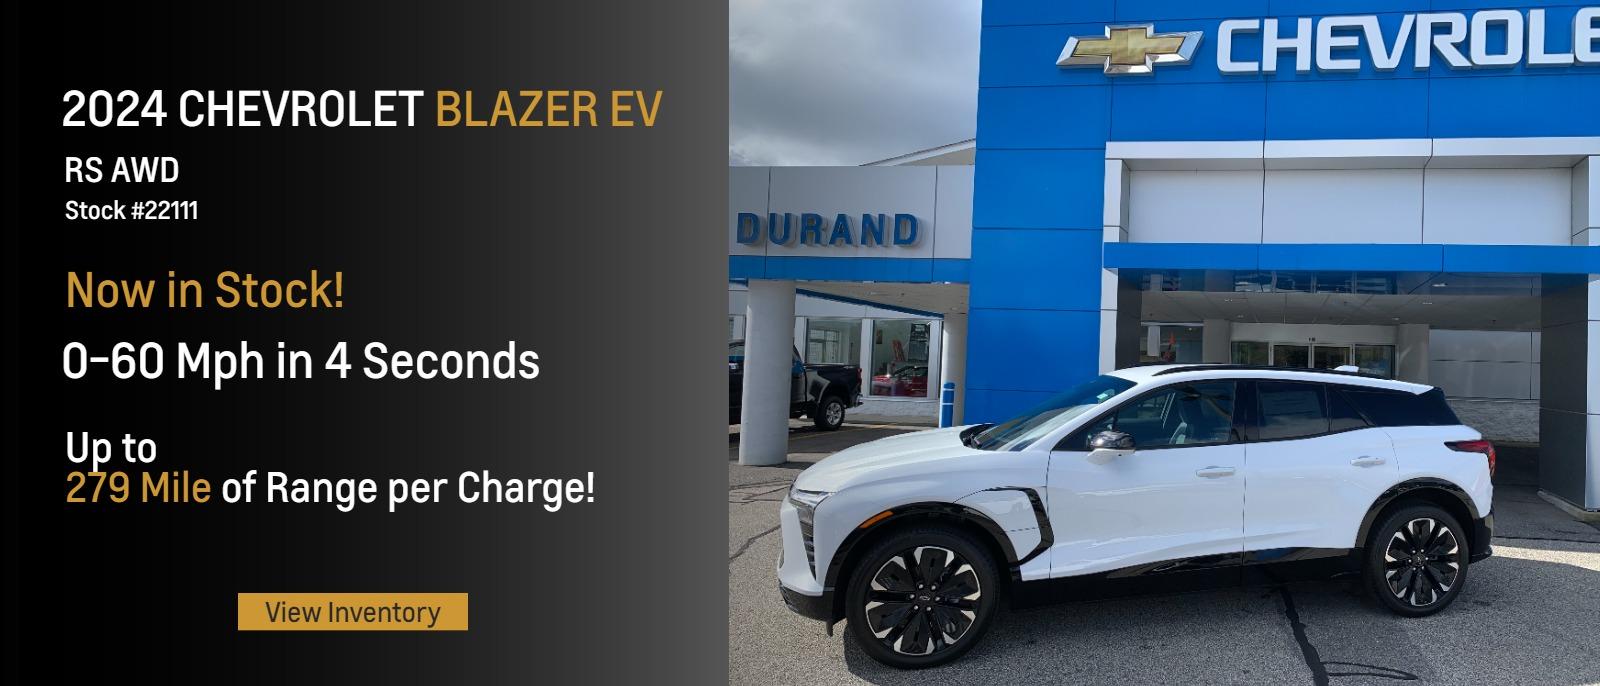 All New 2024 Chevrolet Blazer EV RS AWD
Now in stock! 0-60 mph in 4 seconds
Up to 279 mile of range per charge!
#22111